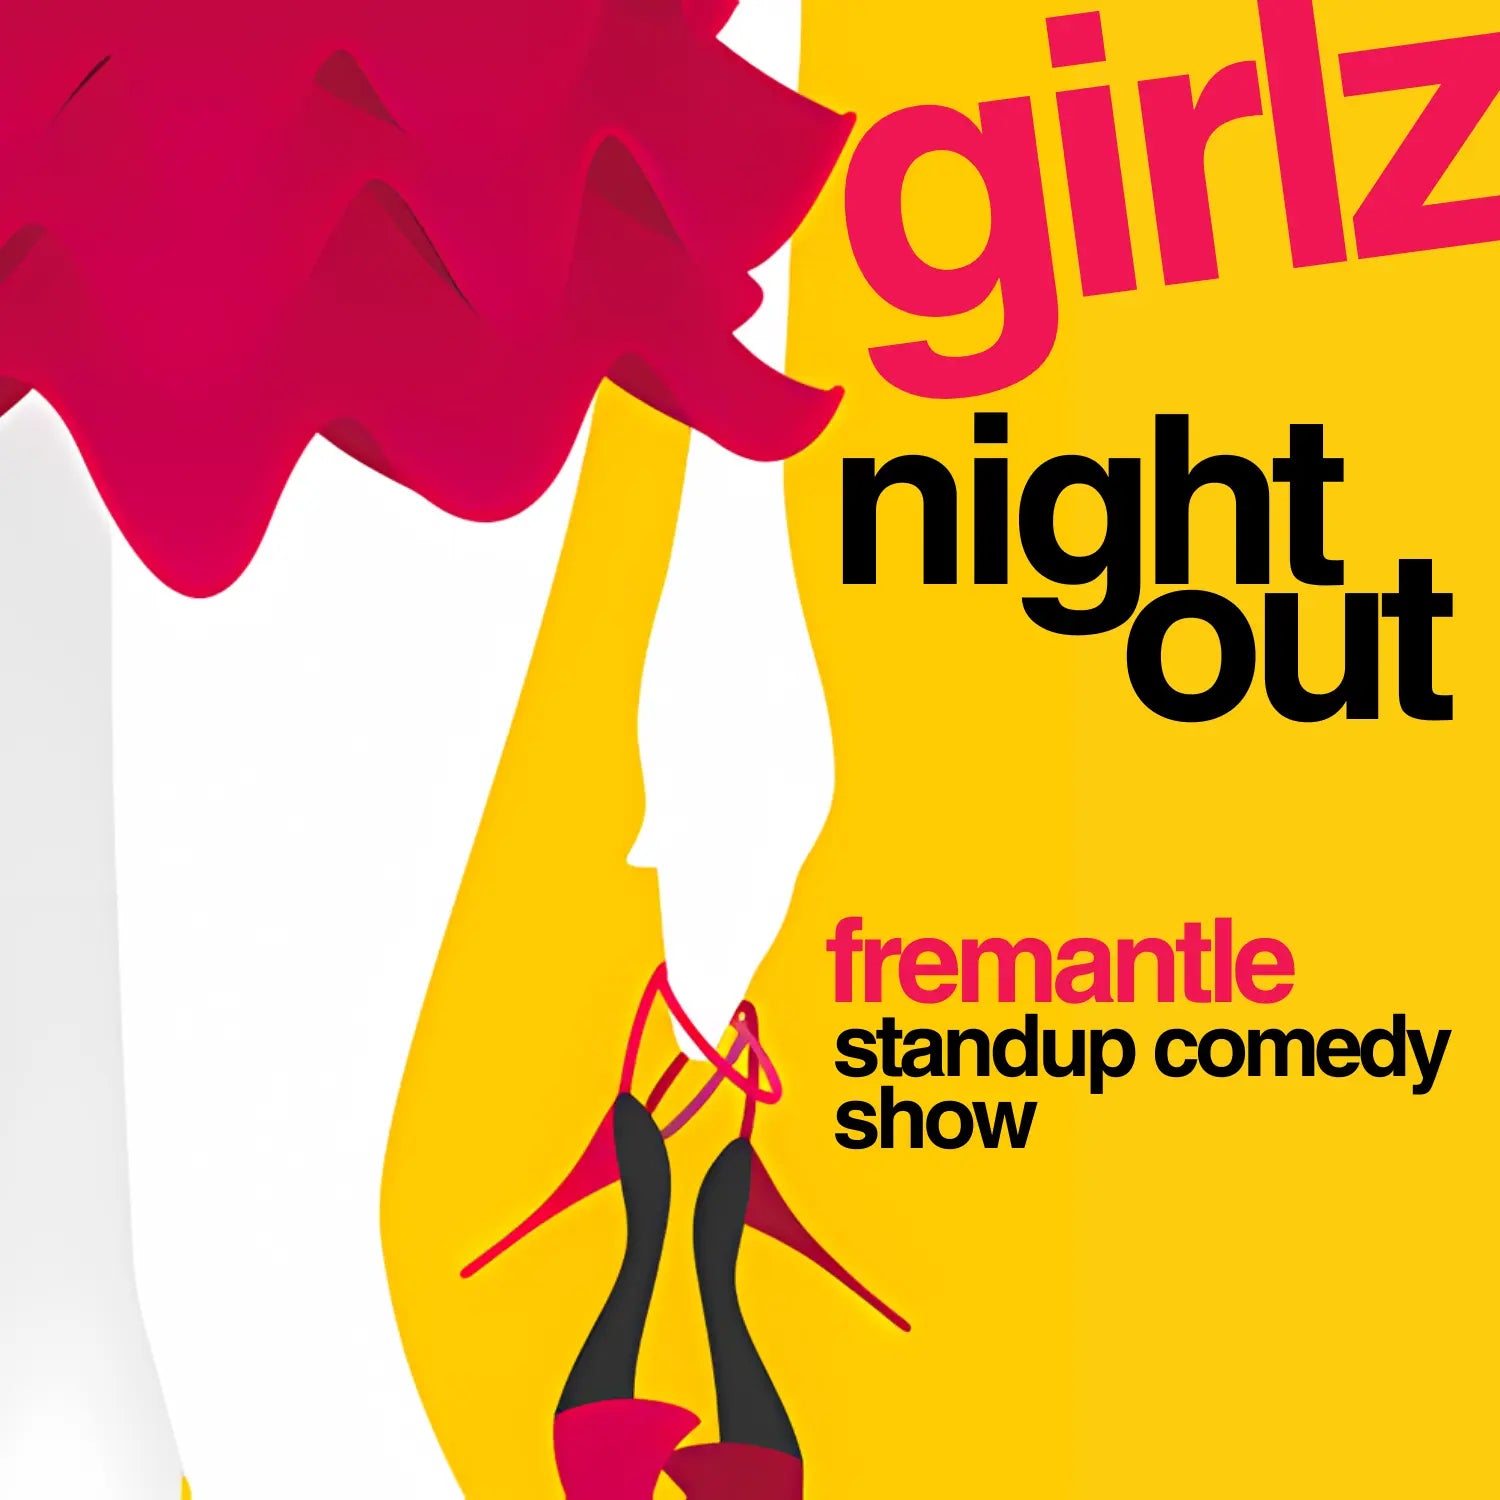 Poster for Girlz Night Out, showcasing top comedians at Comedy Lounge Fremantle for a great night out. buy tickets now.